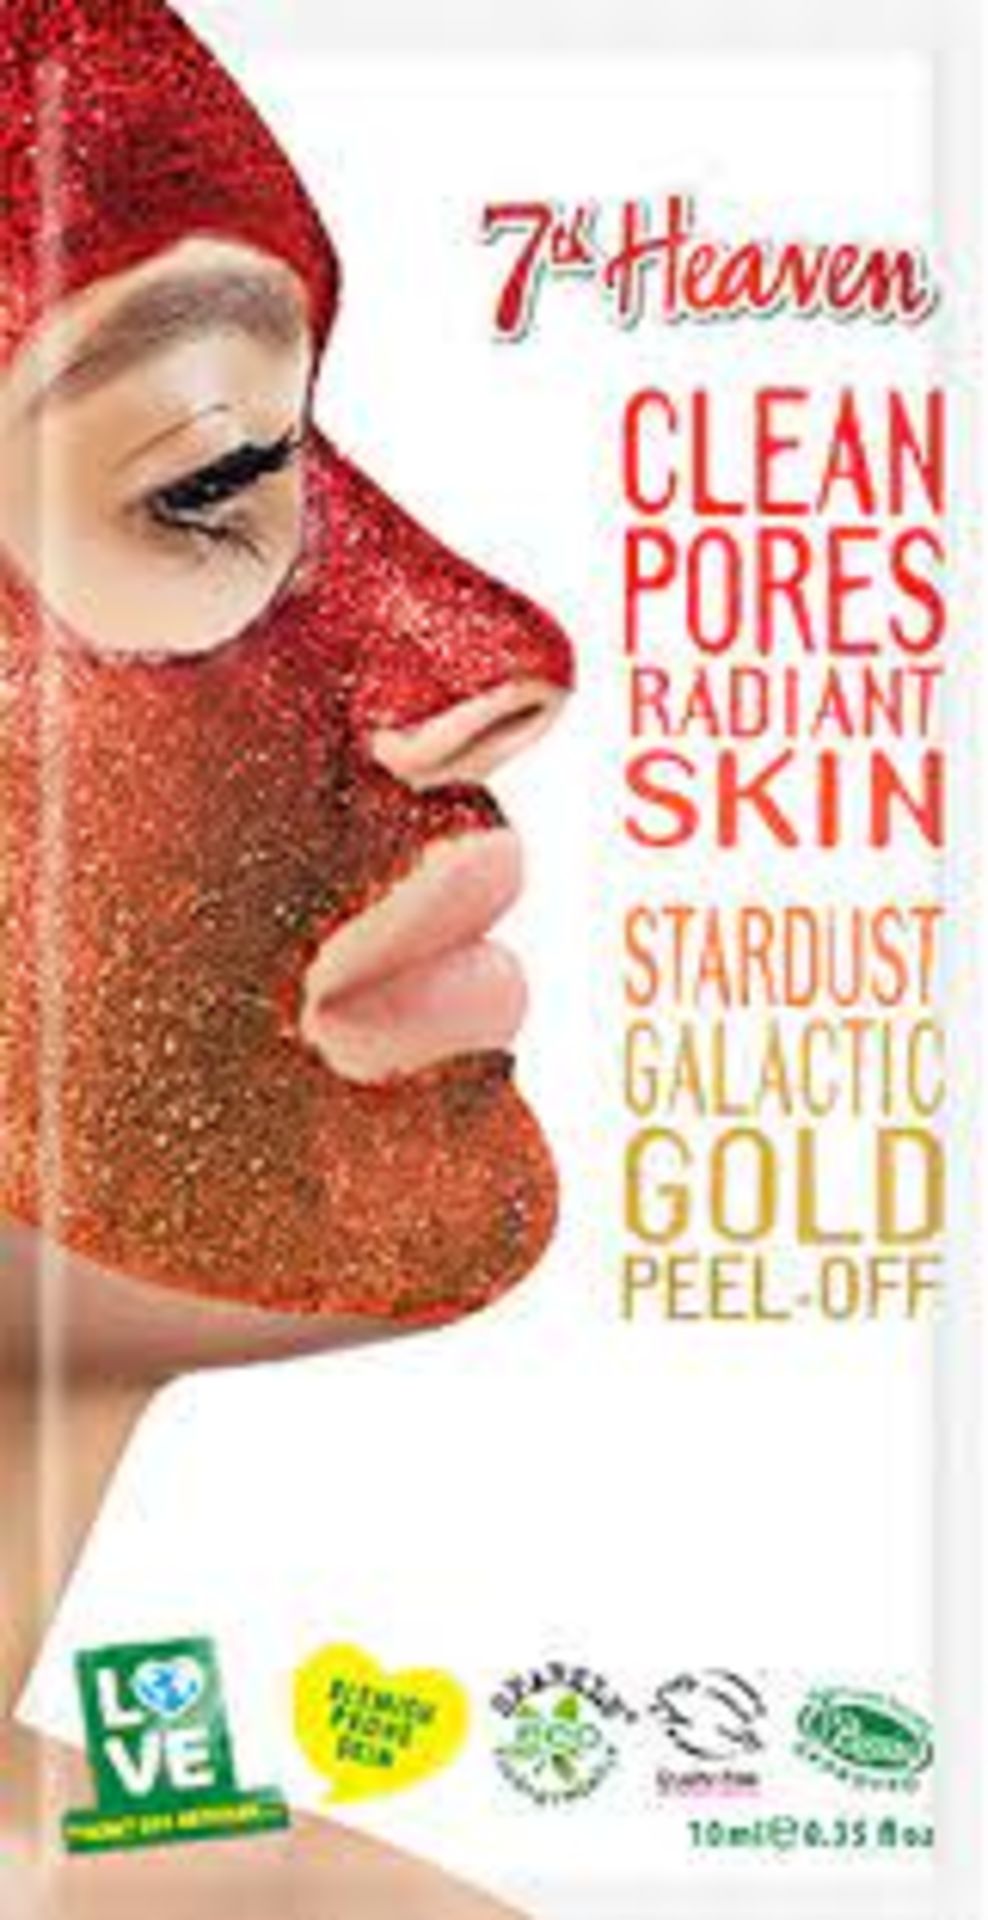 95 x Brand NEW Stardust Galactic Gold 7th Heaven Mask - PW